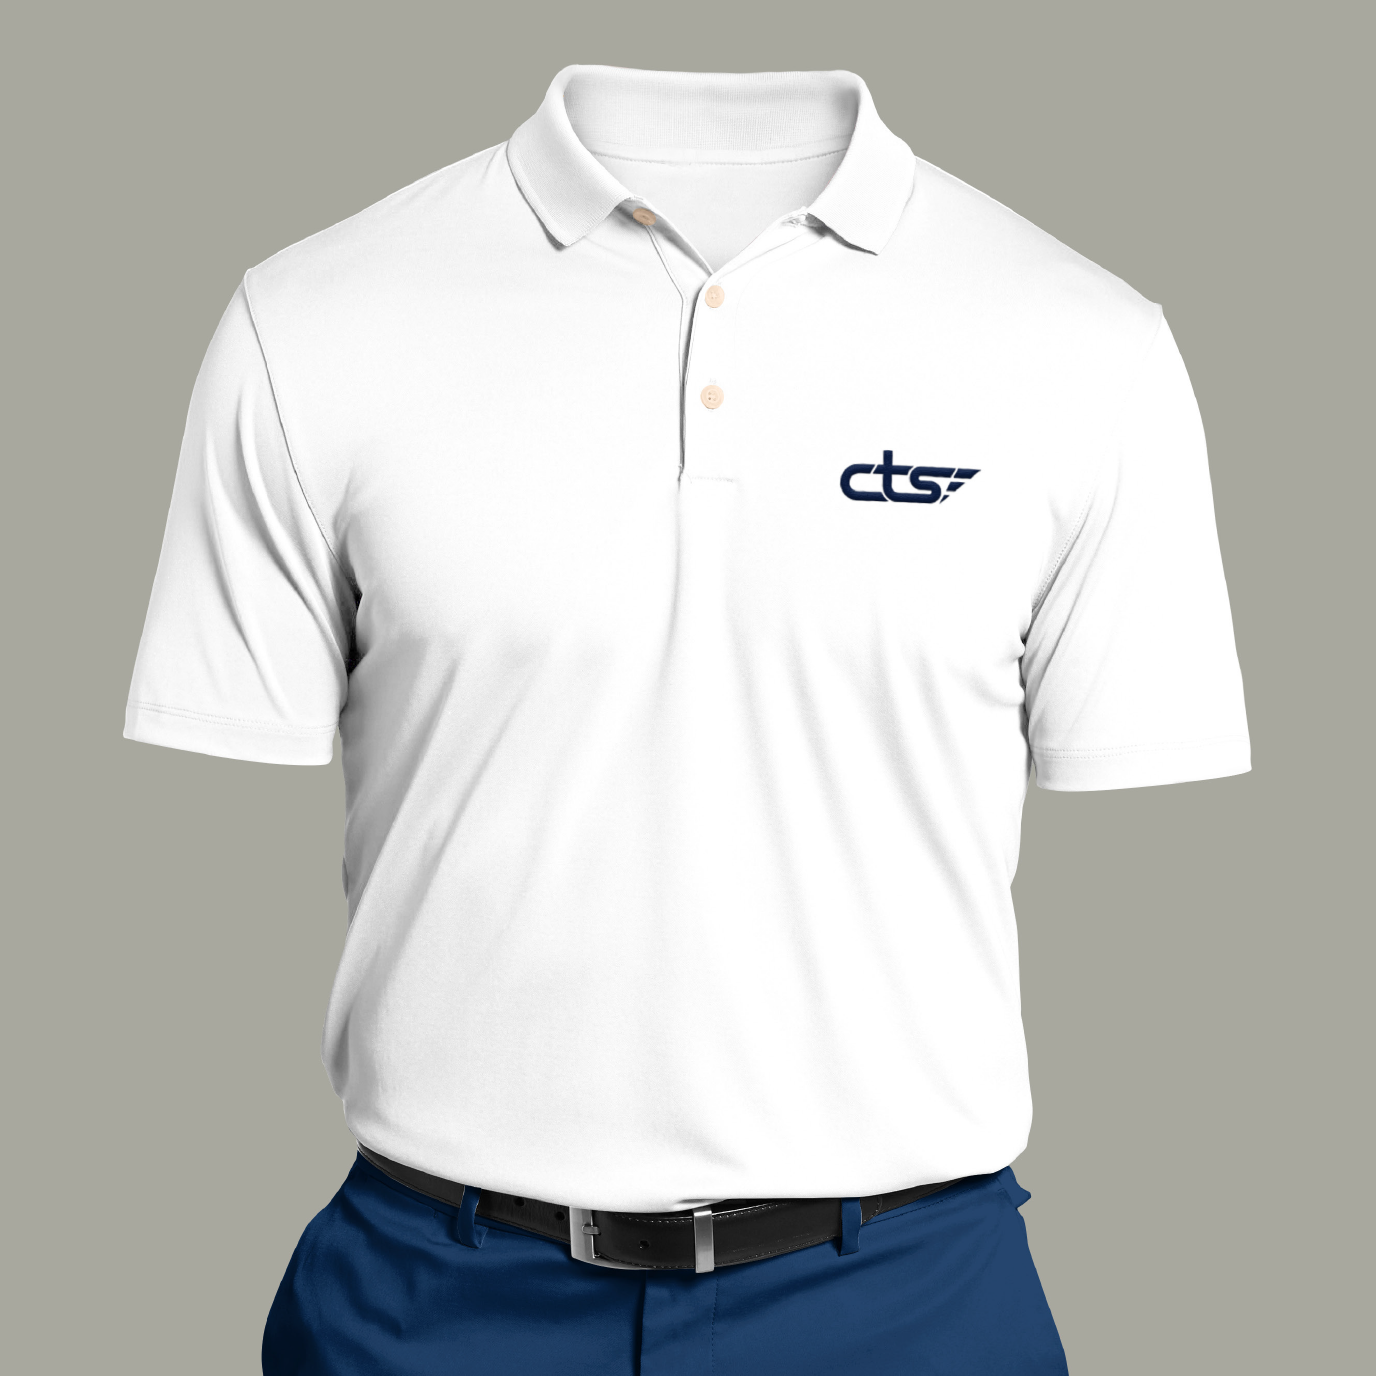 picture of embroidered shirt with cts logo